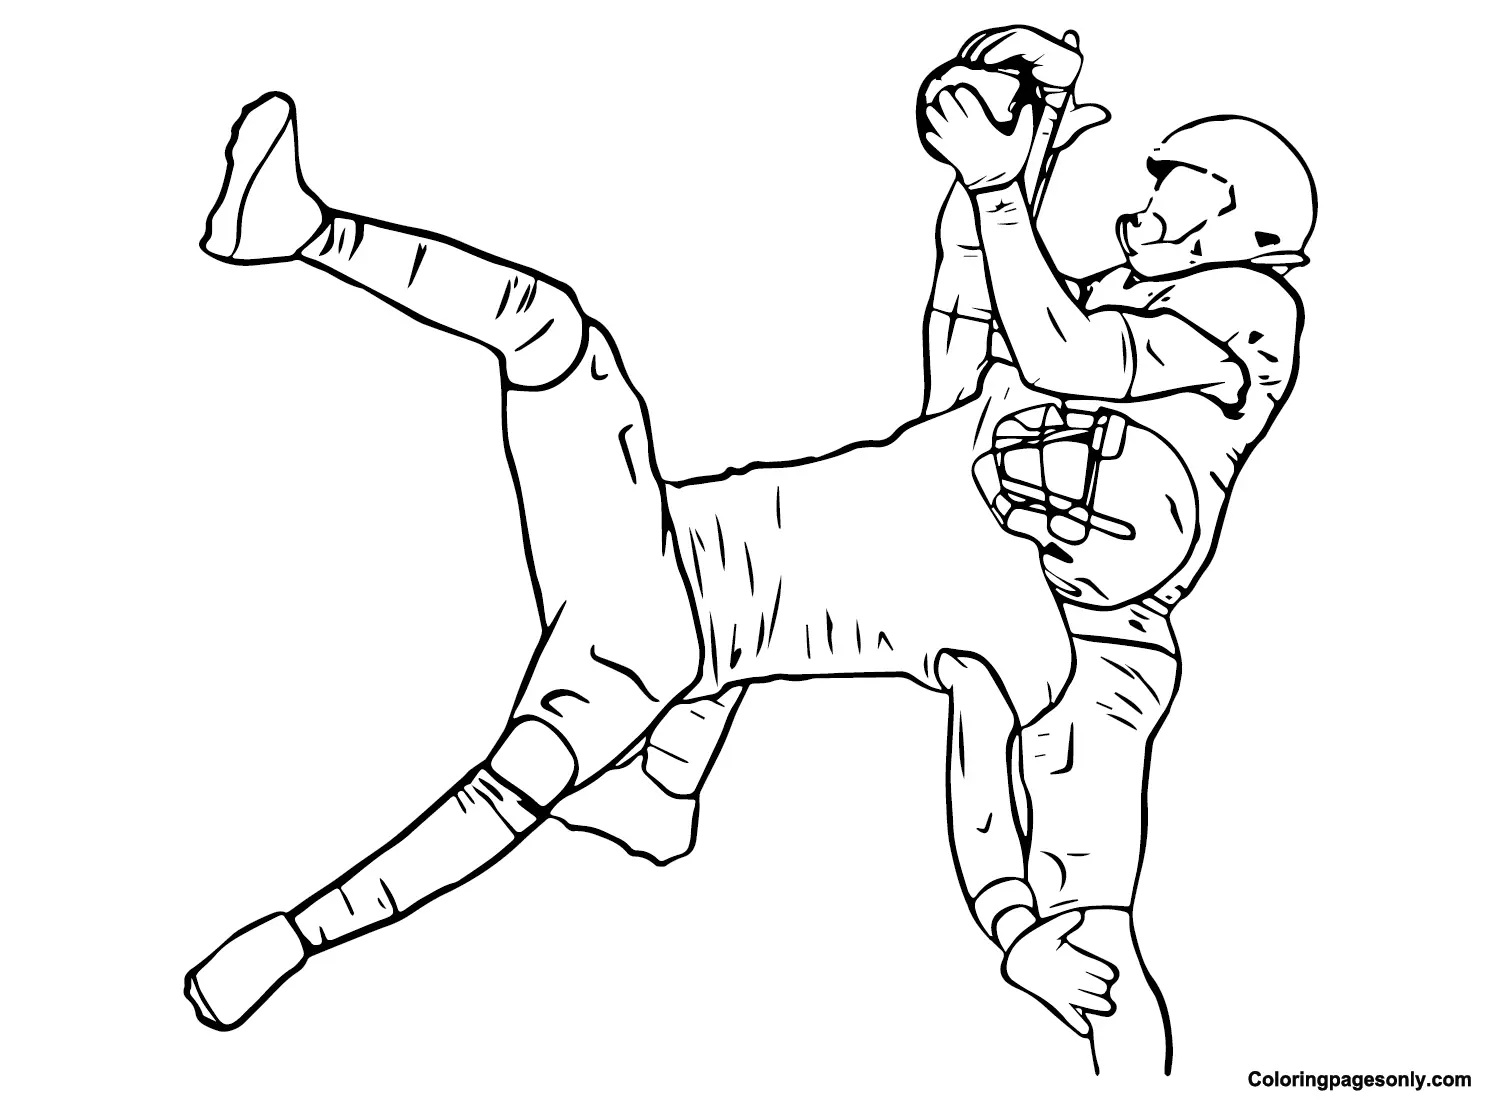 Justin Jefferson Coloring Pages